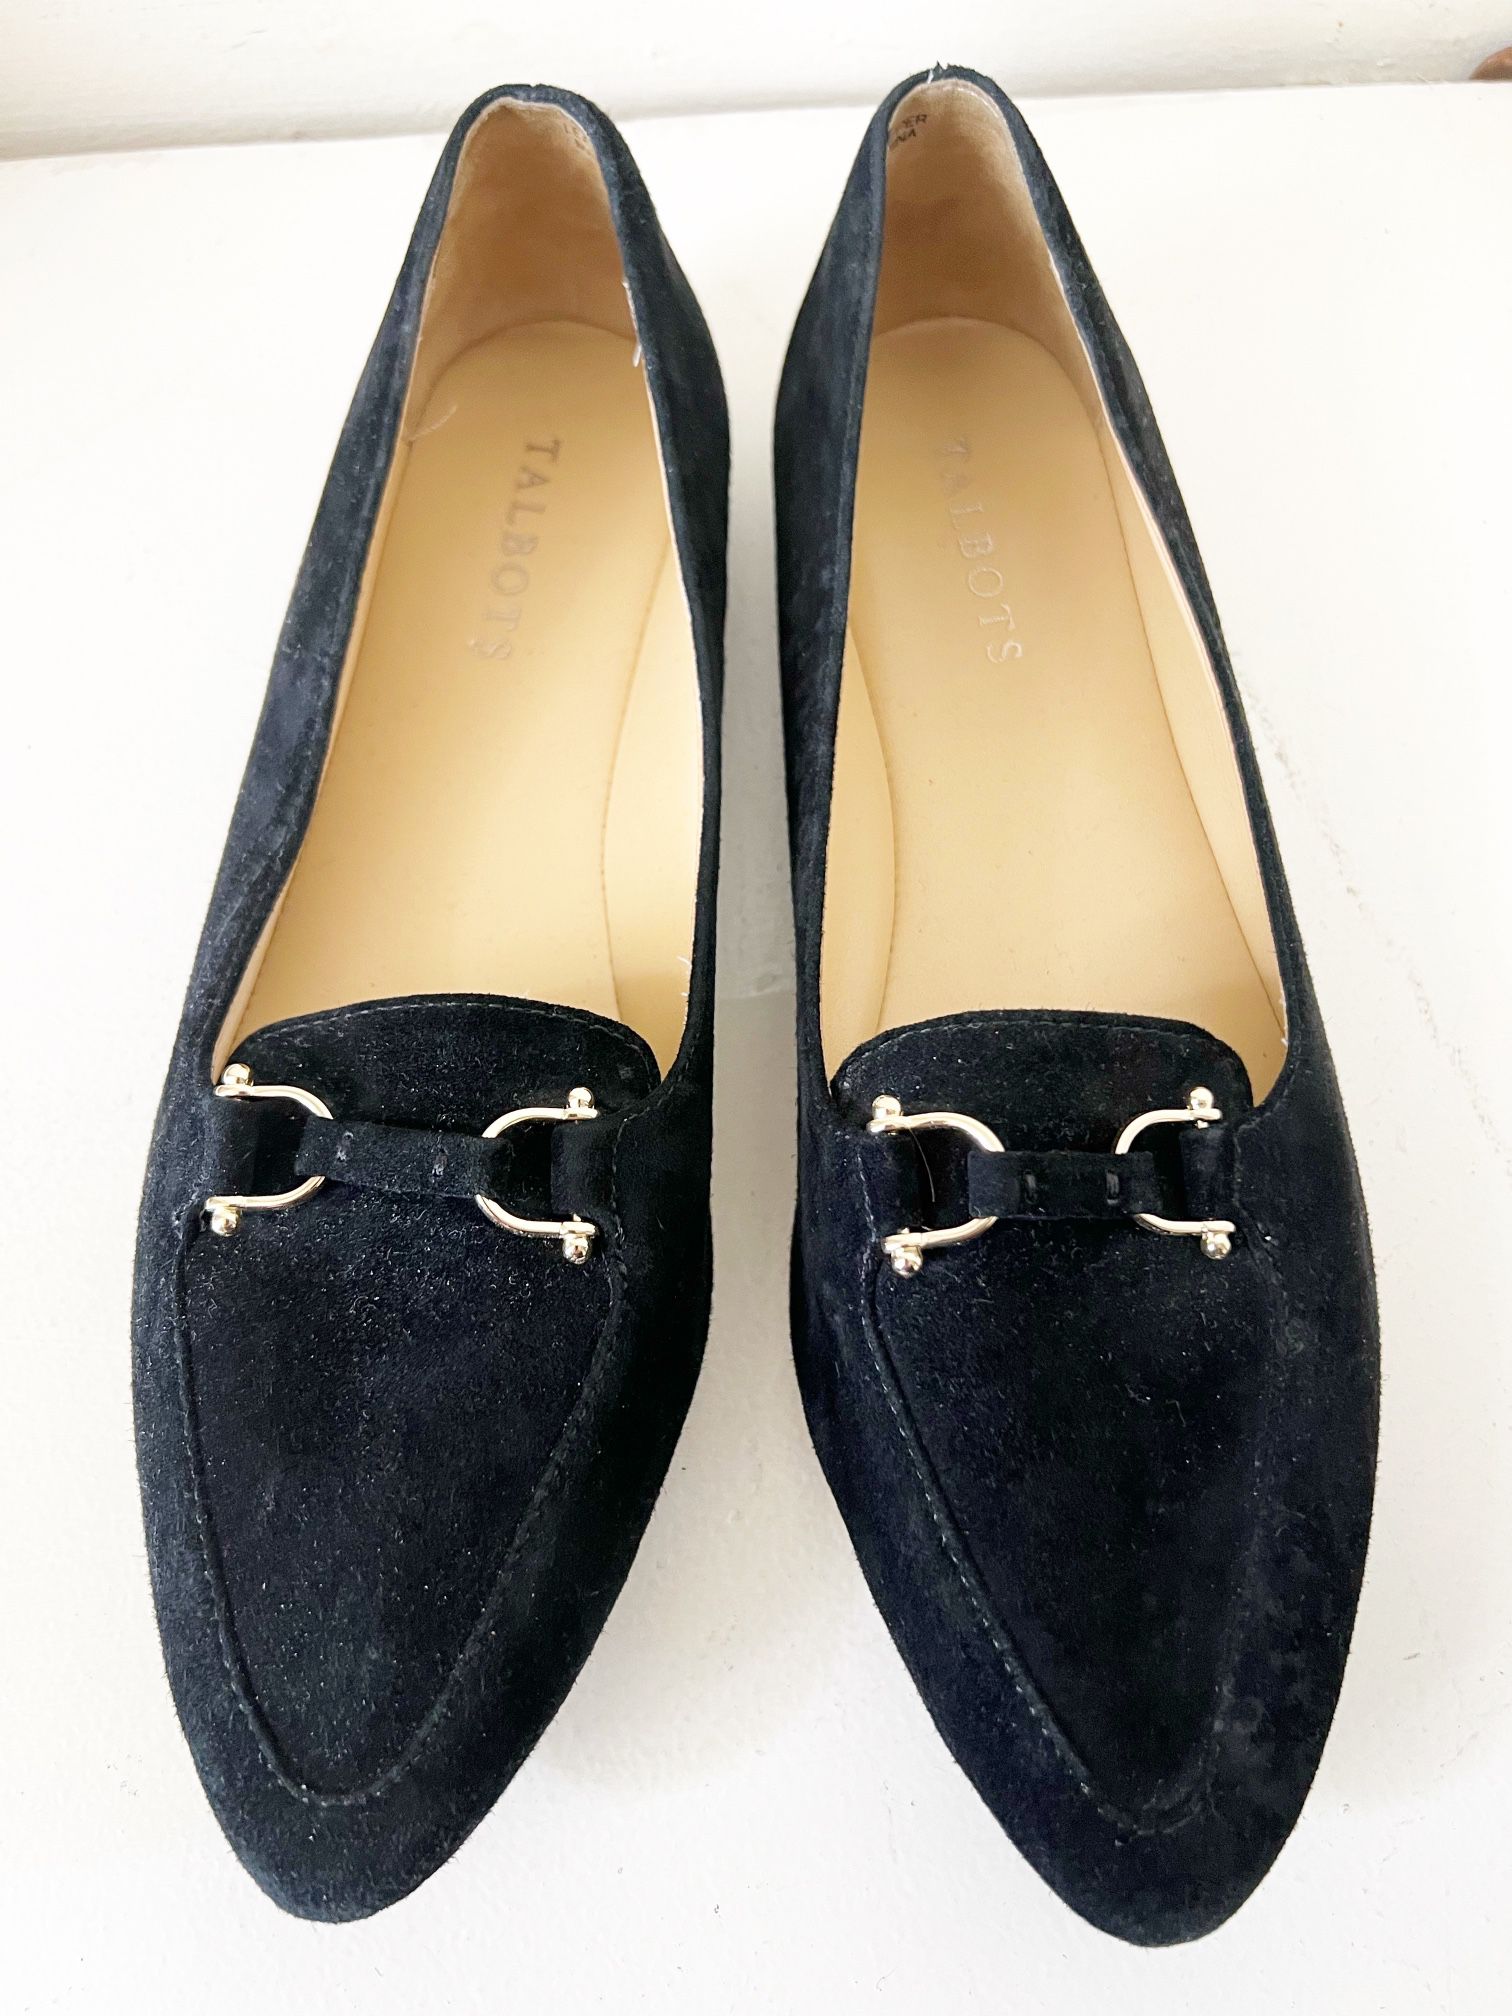 Talbots Loafers Women’s 8 AA Leather Suede Black Driver Horse Bit Flat Shoes